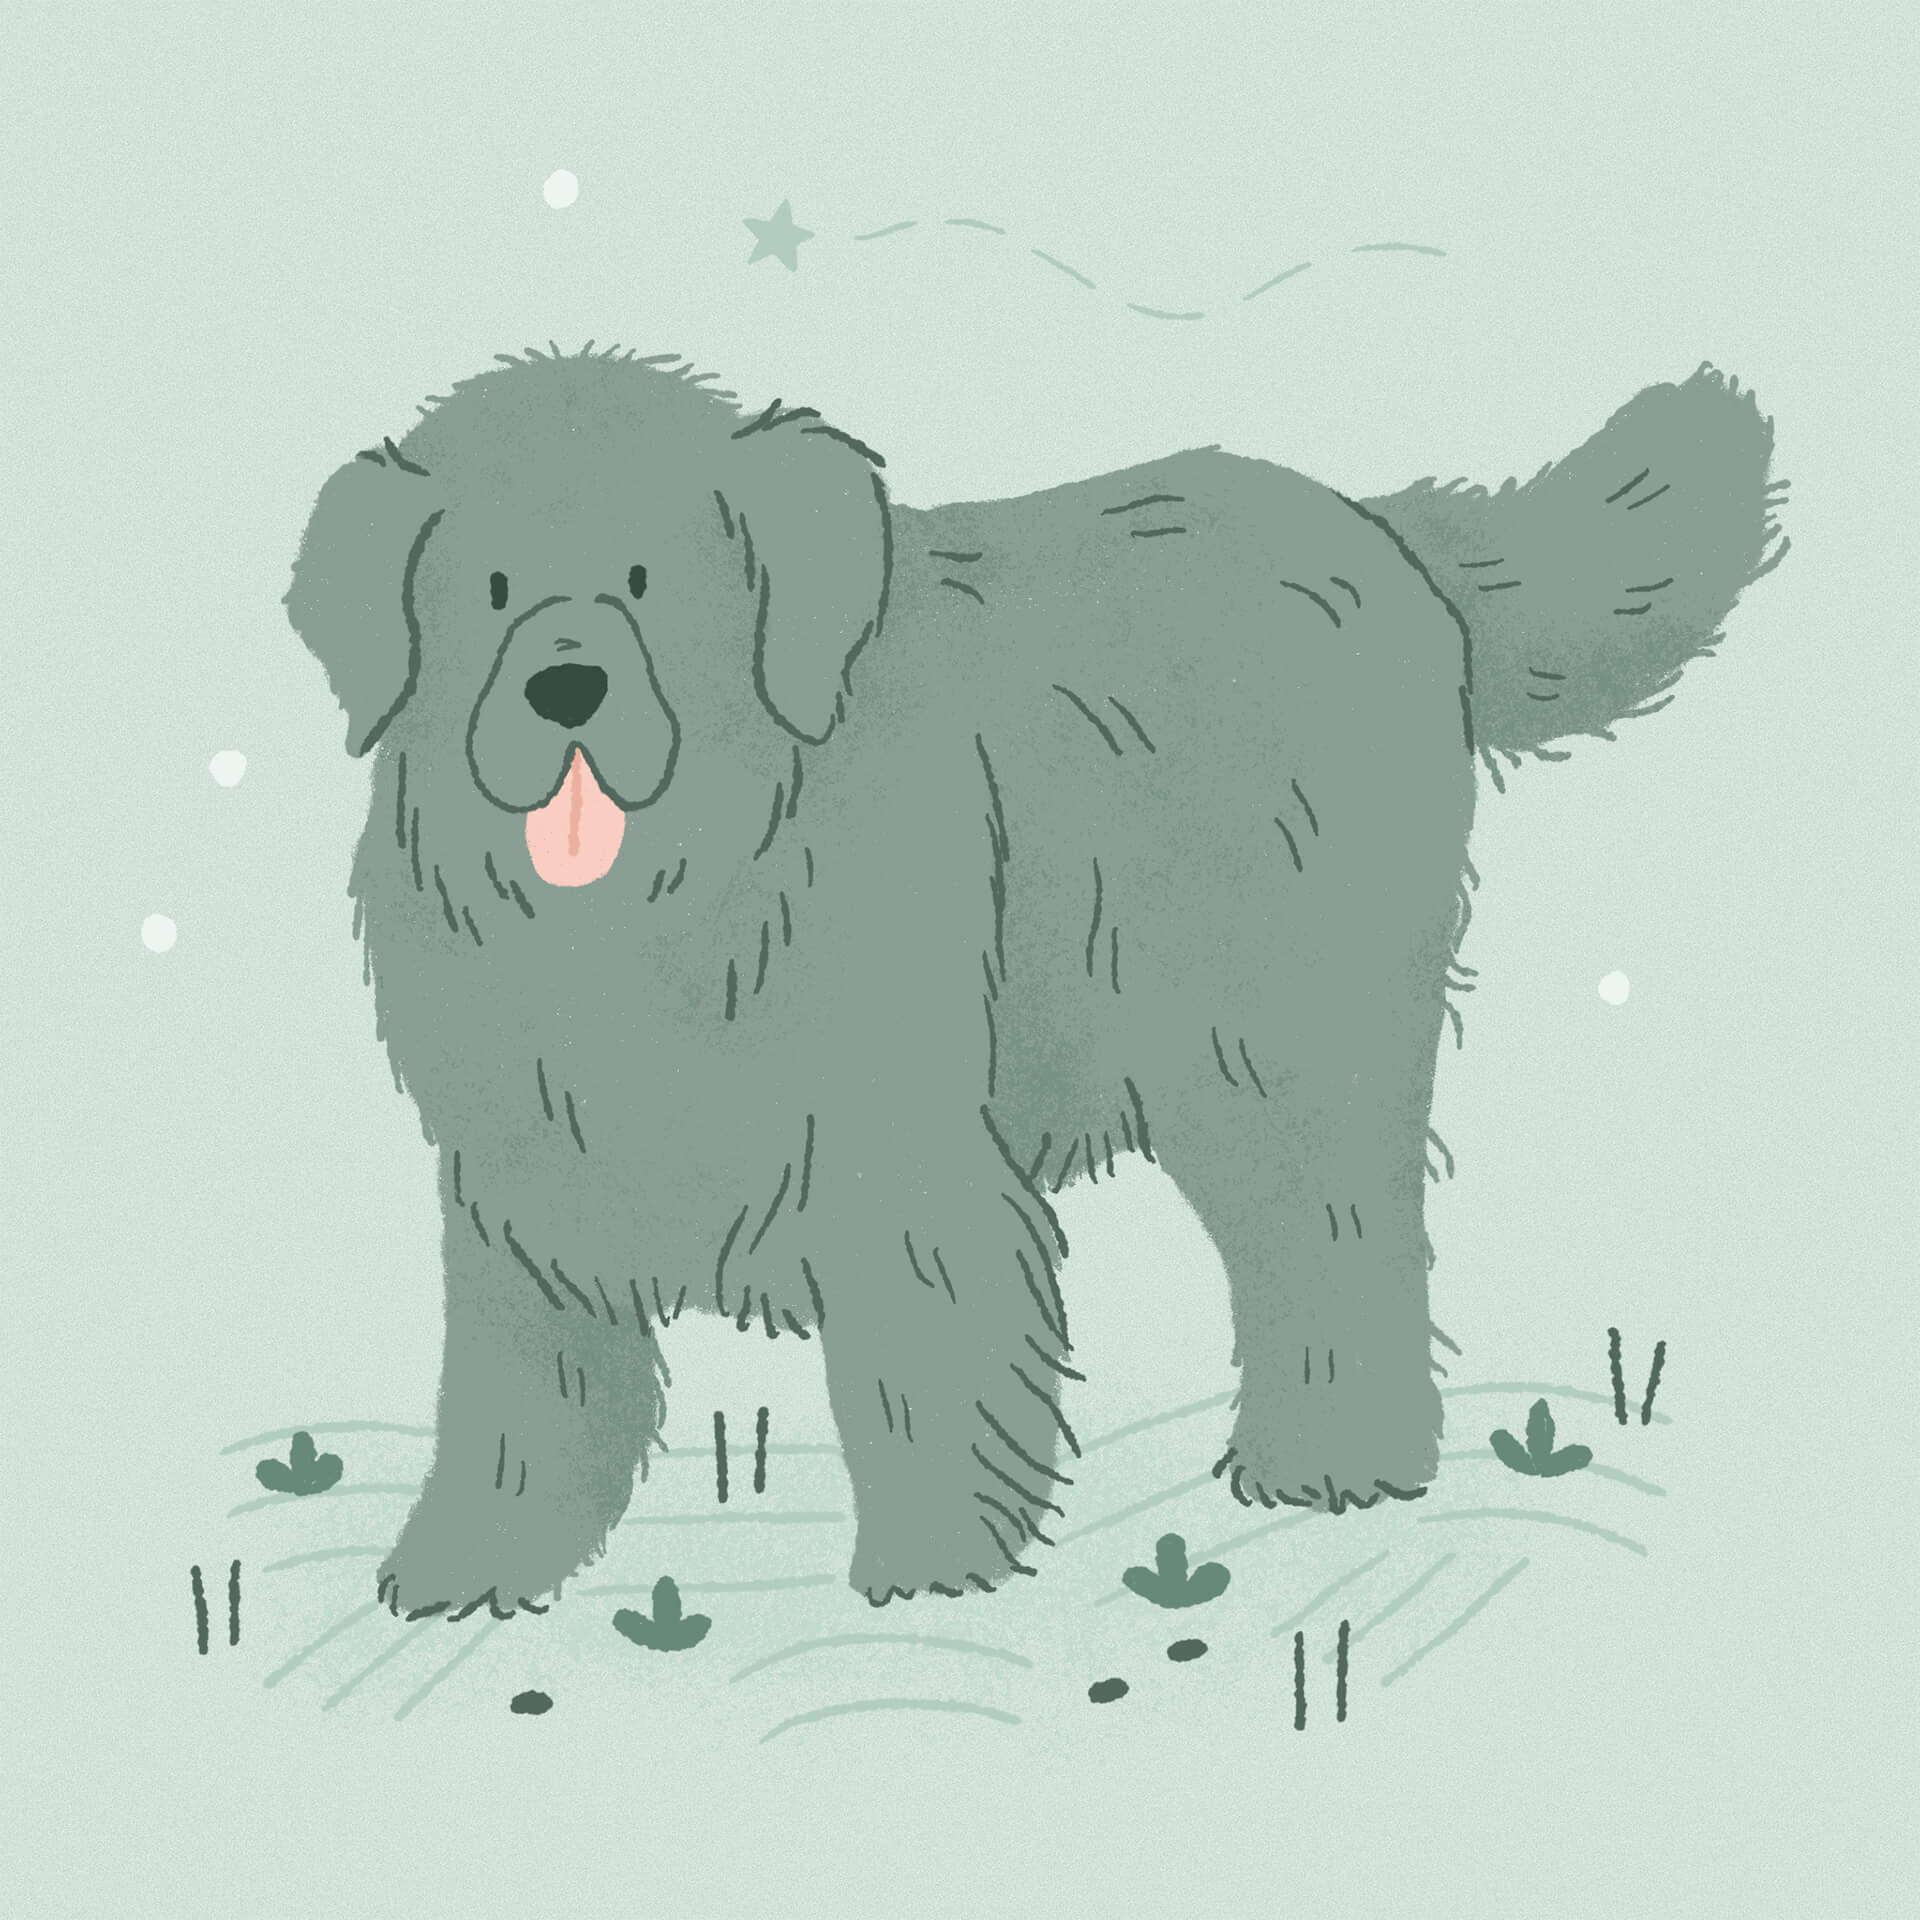 An illustration of a blue newfoundland dog smiling with its tongue out